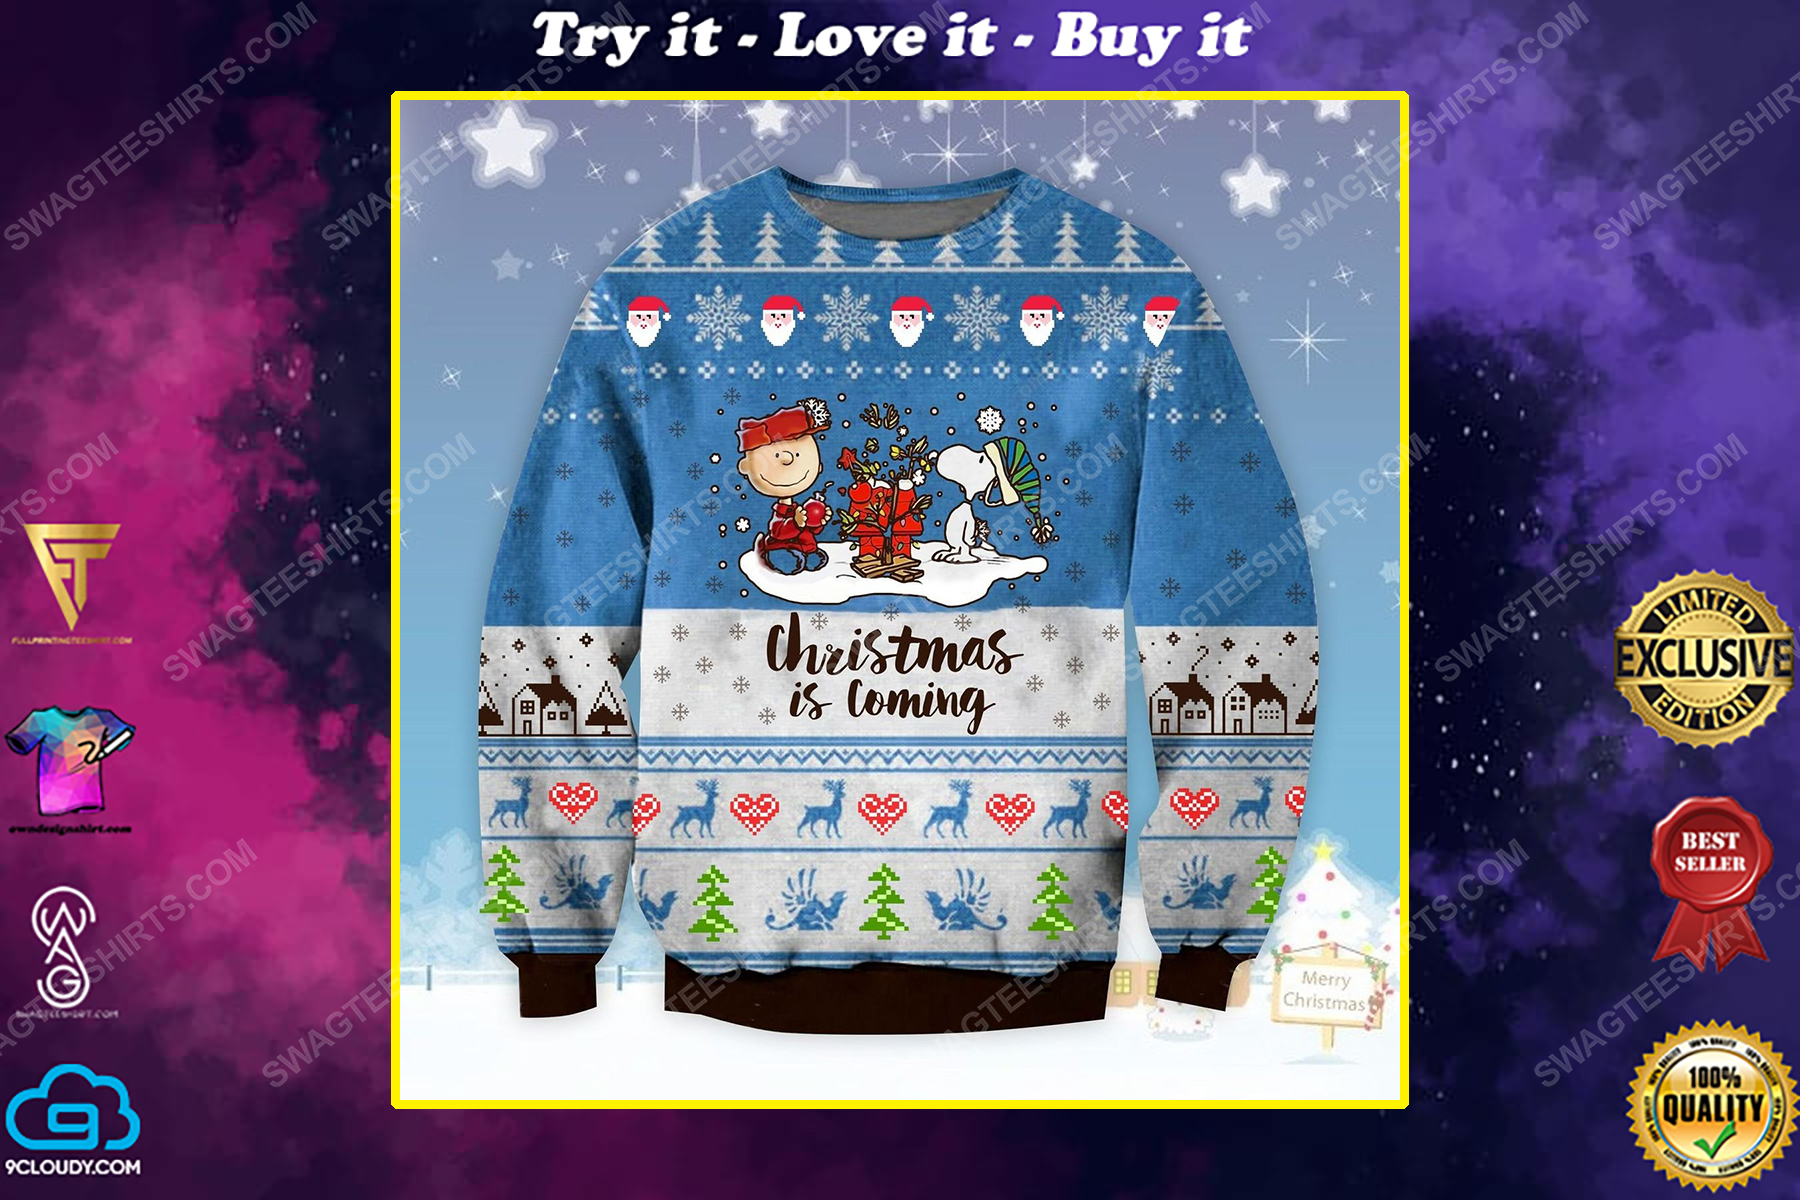 Charlie brown and snoopy christmas is coming ugly christmas sweater 1